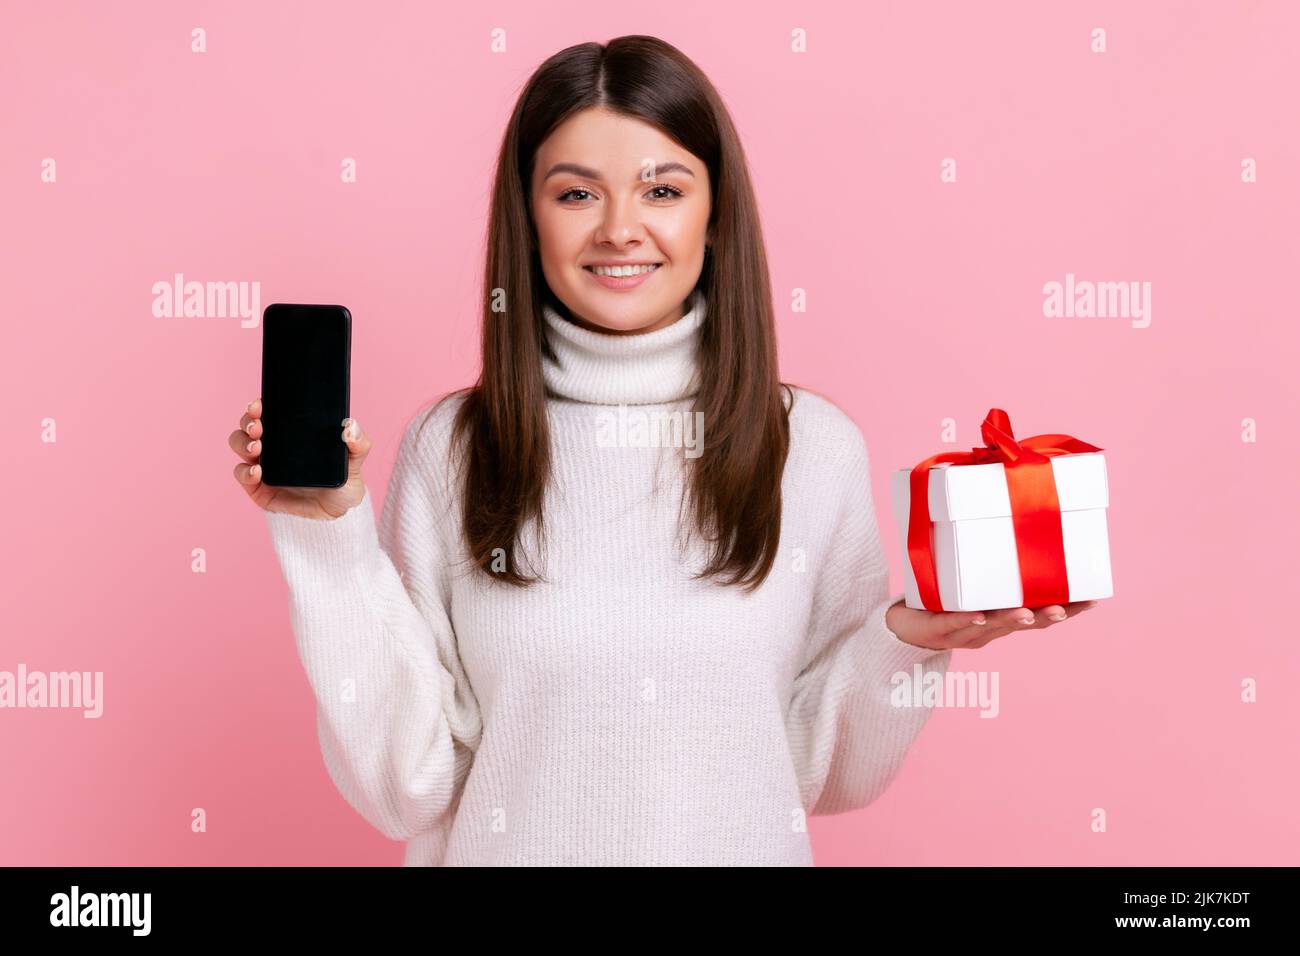 Smiling brunette woman holding wrapped present box and smart phone with blank screen for promotion, wearing white casual style sweater. Indoor studio shot isolated on pink background. Stock Photo